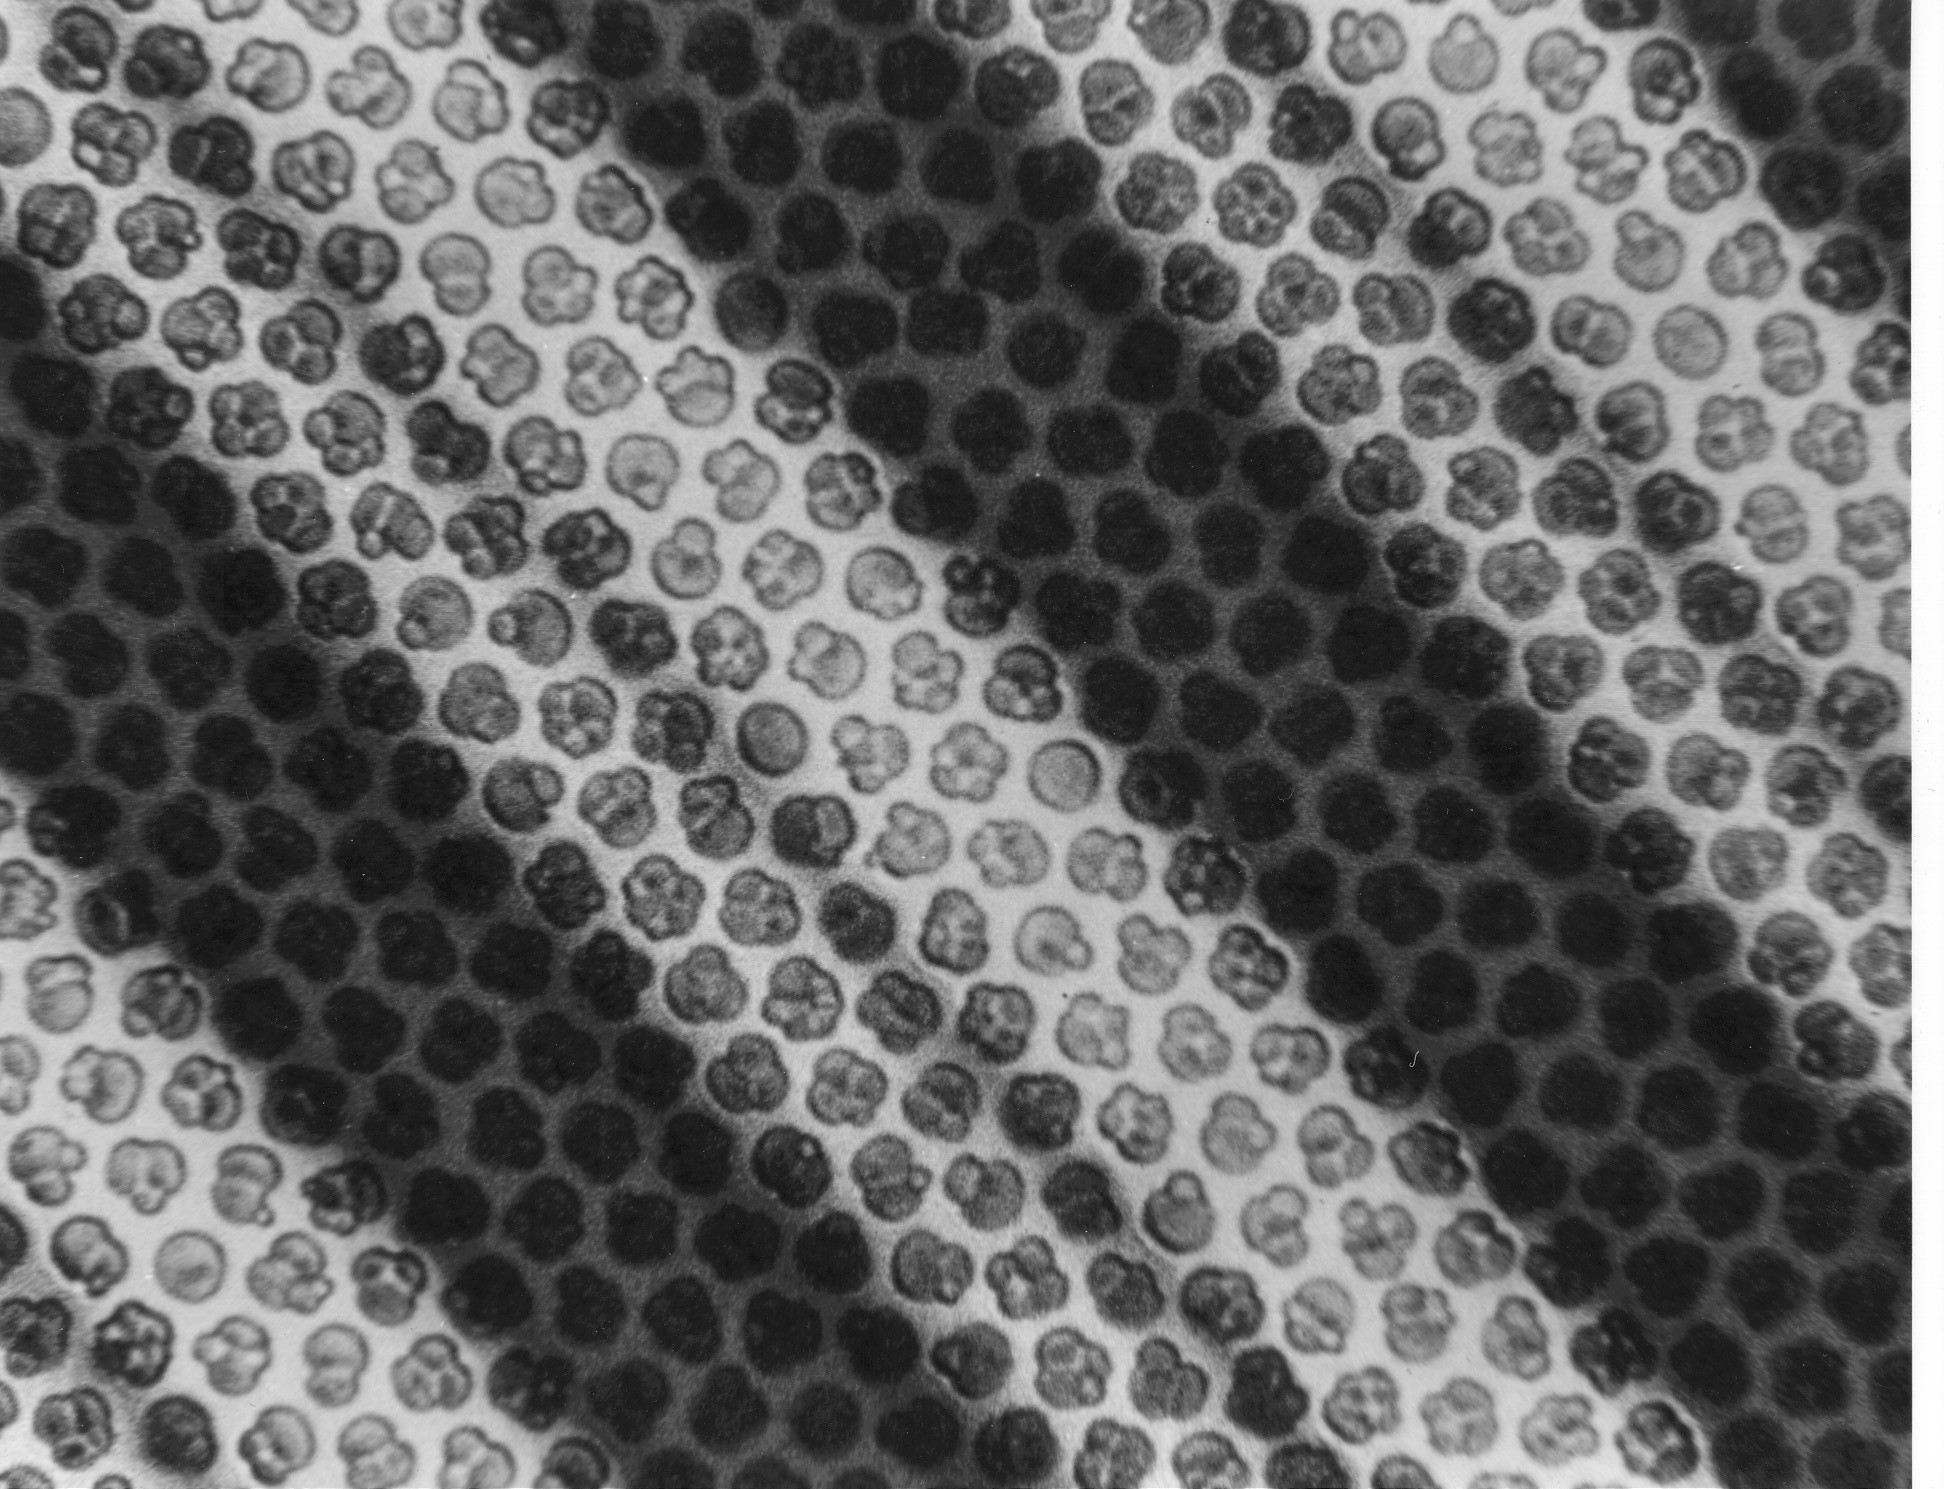 nanoparticle array